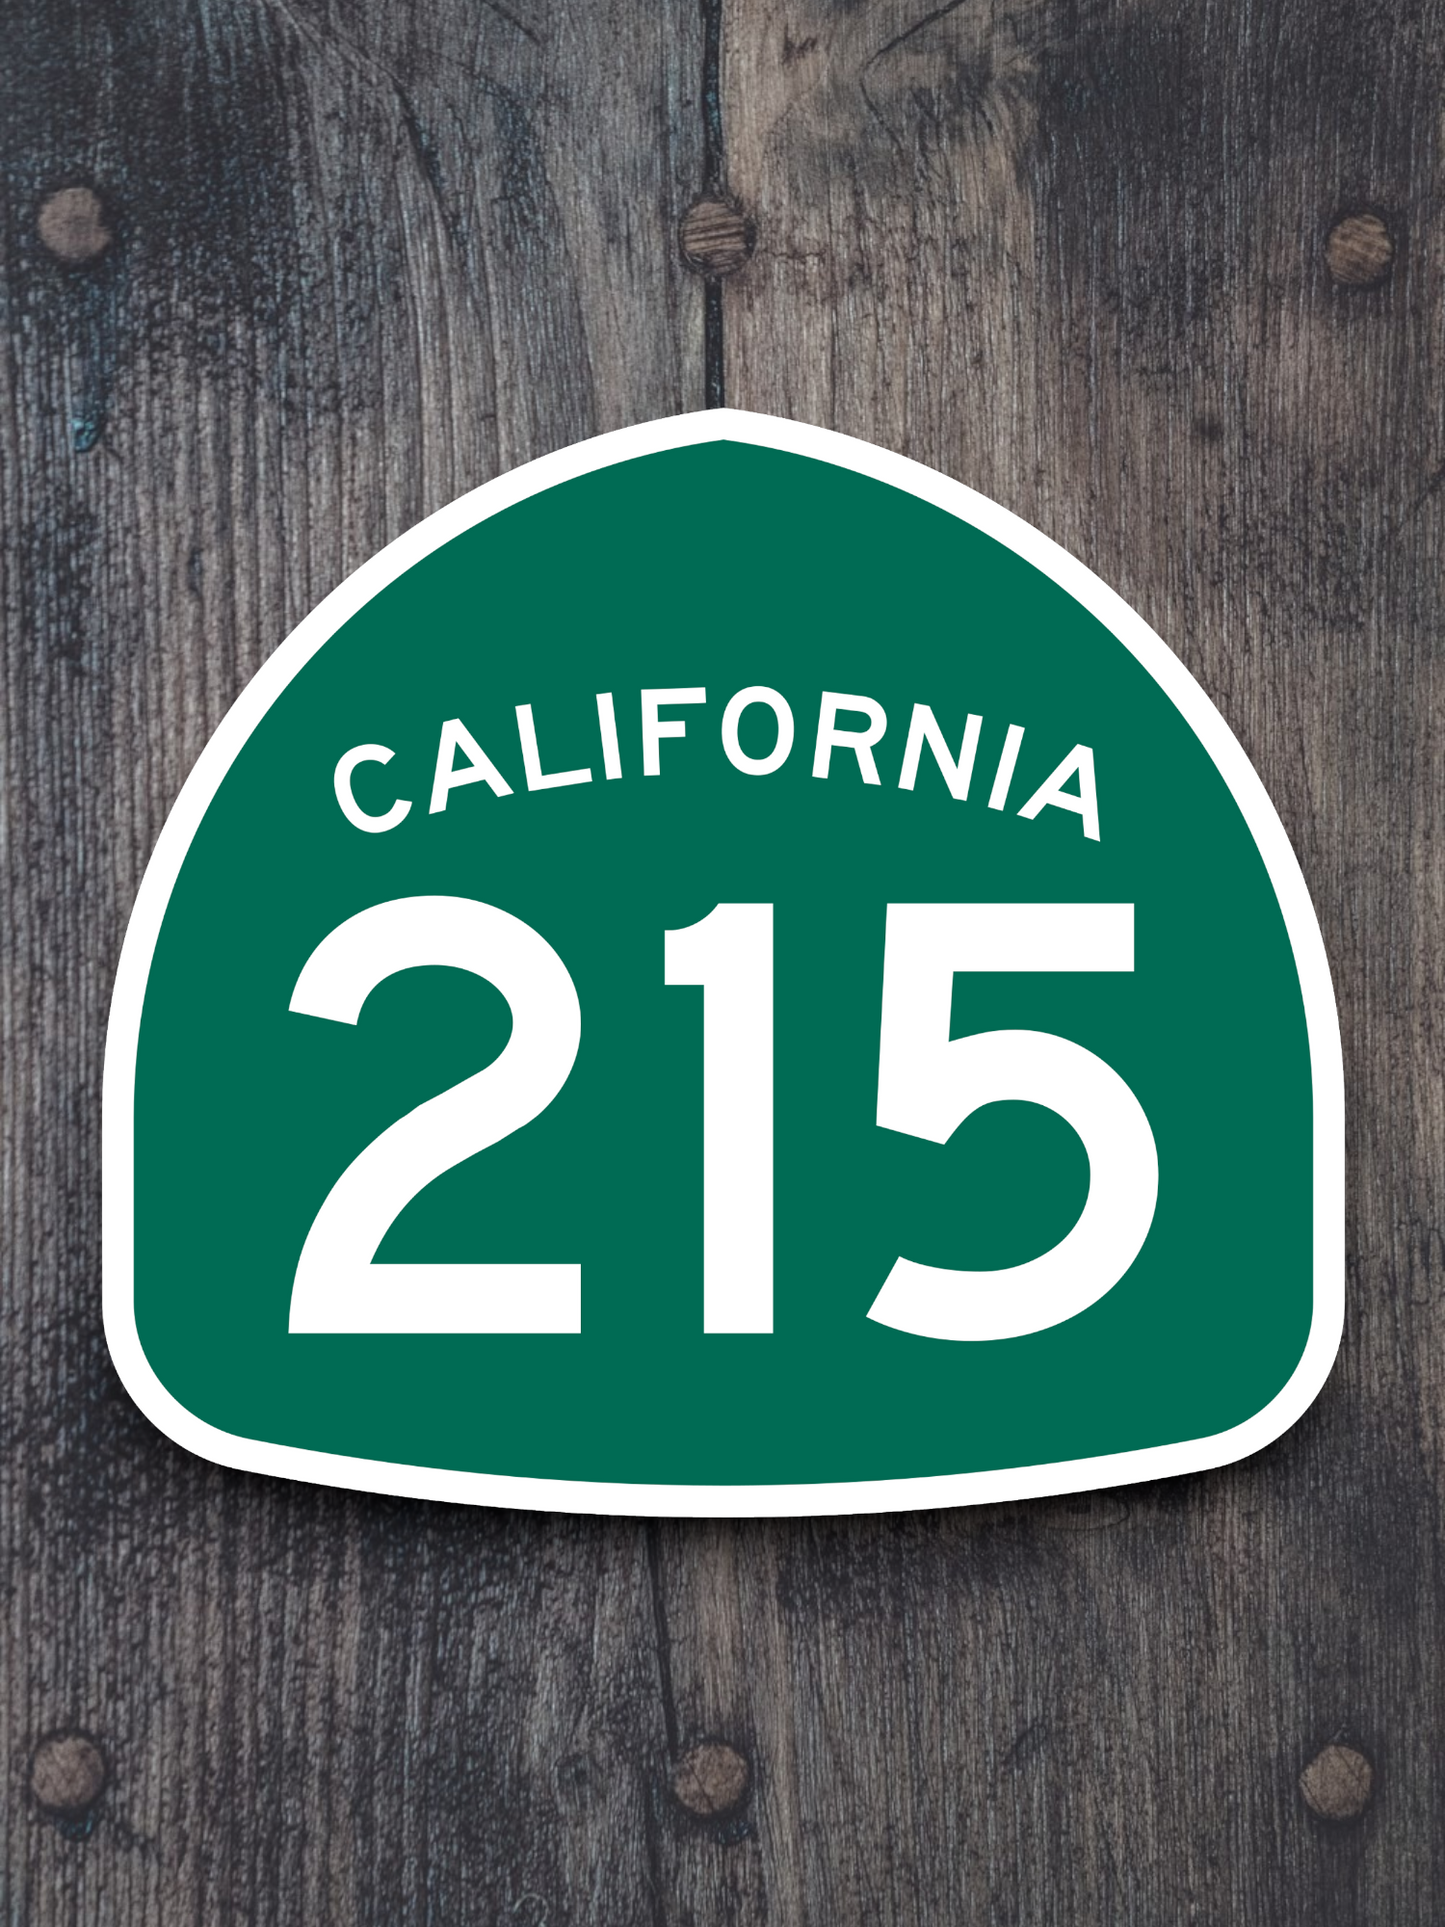 California State Route 215 Road Sign Sticker